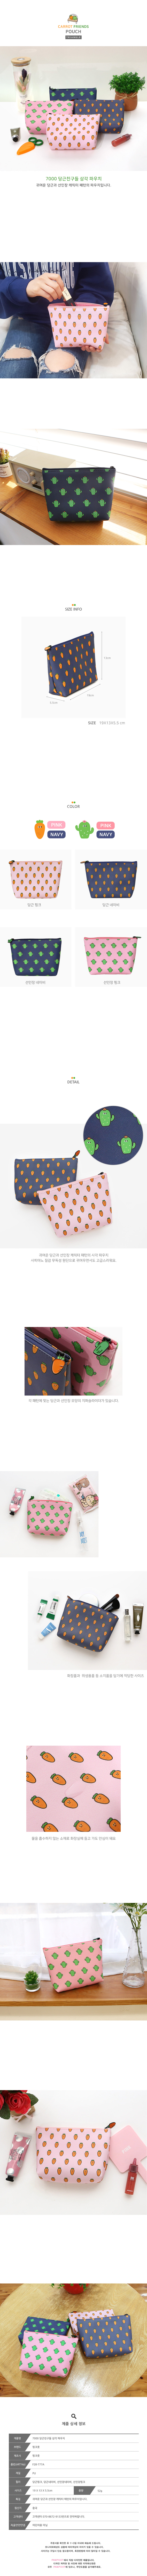 7000_carrot_friends_triangle_pouch_ver1.jpg